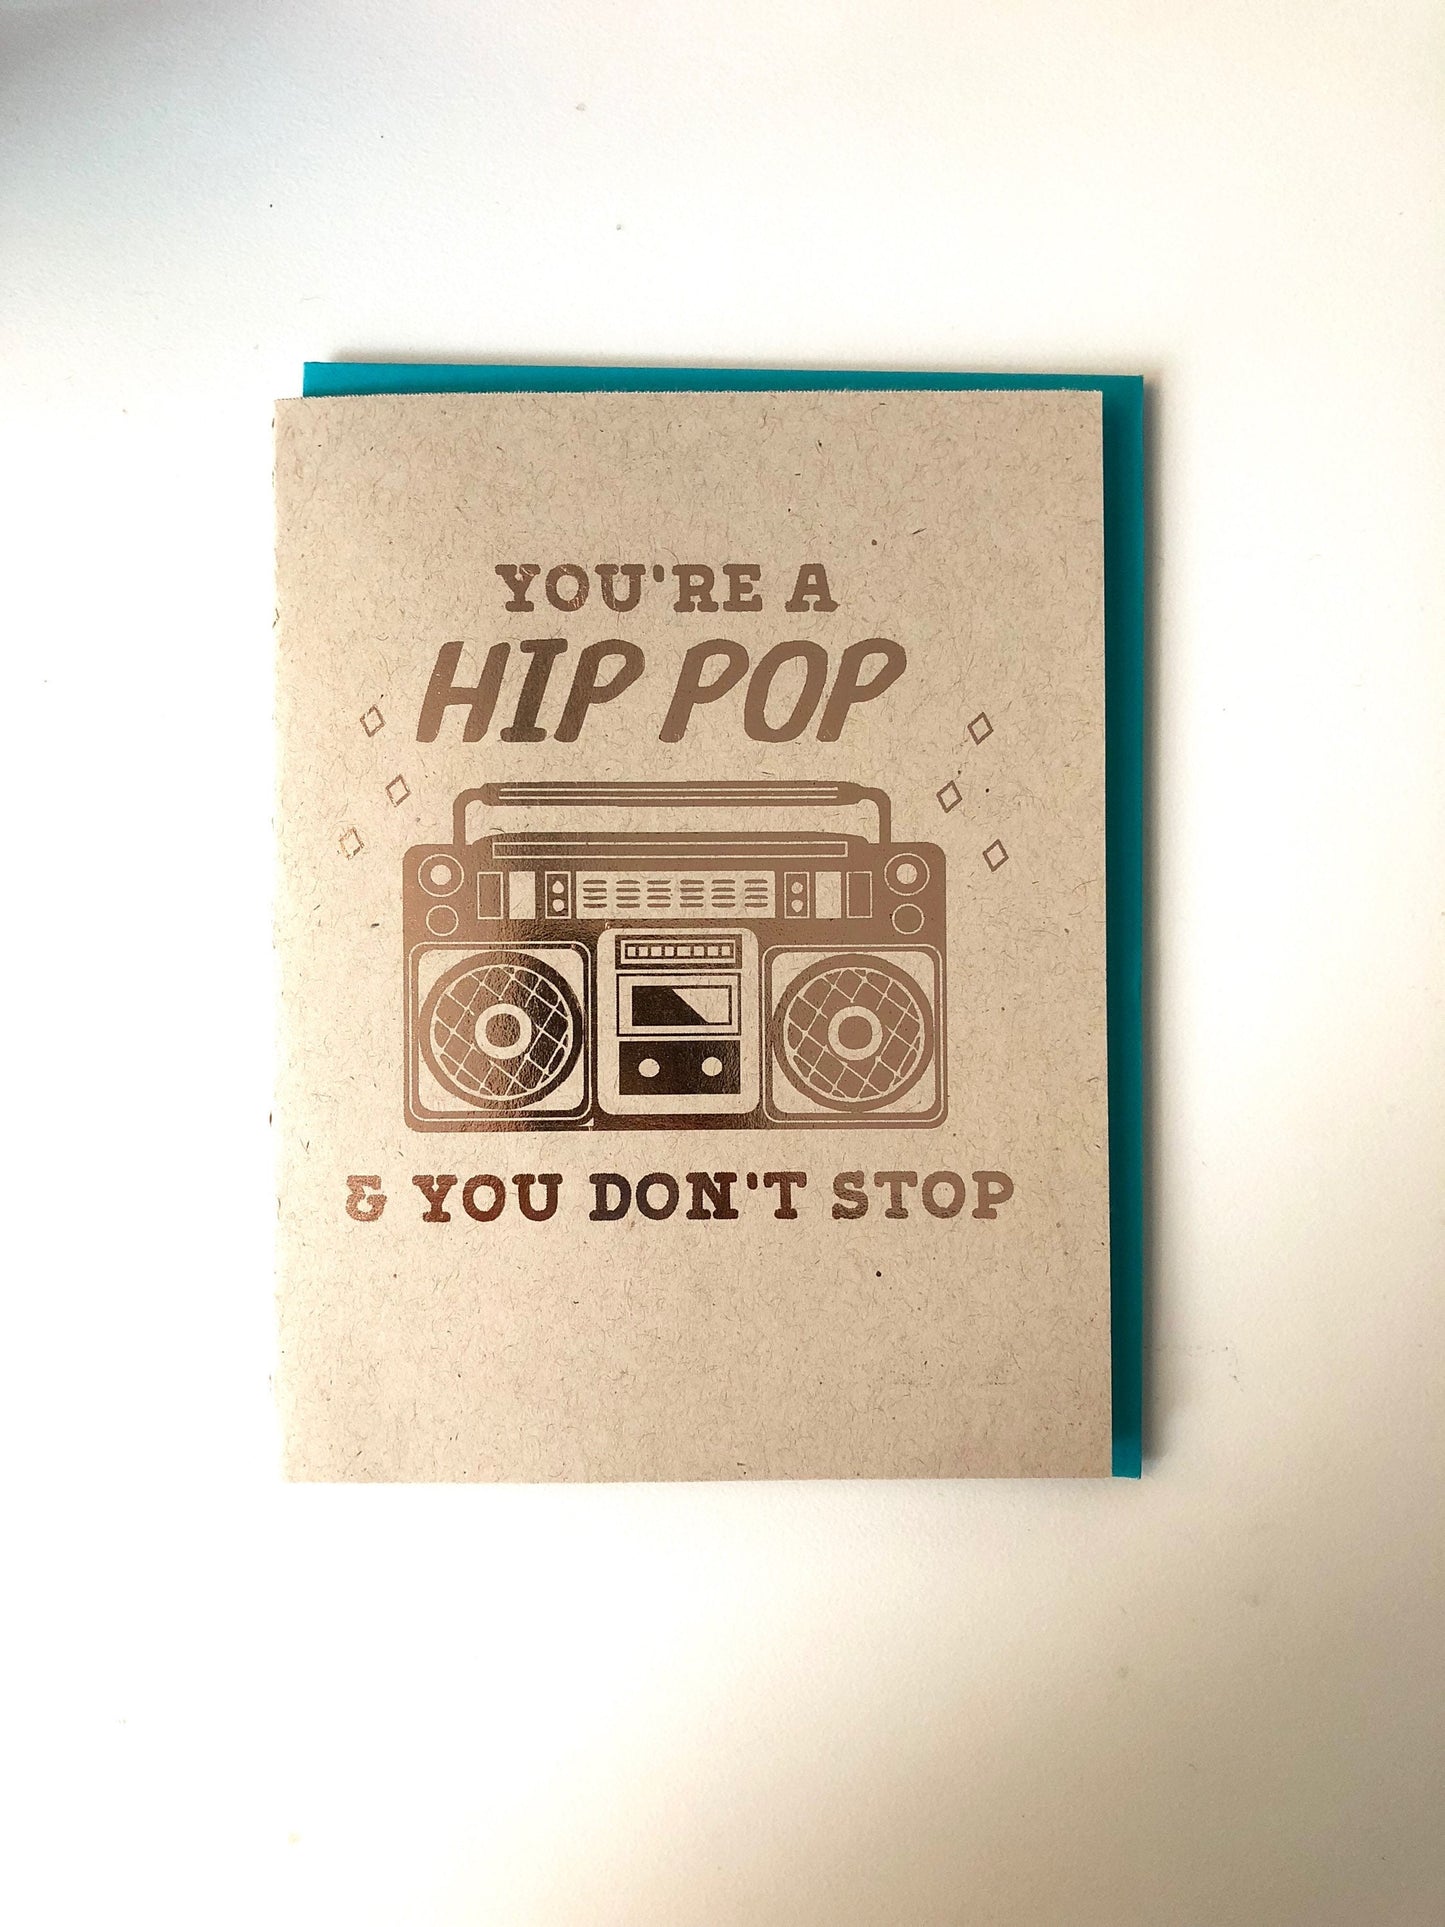 Hip Hop Father's Day Card- Funny Boombox Hip Pop Card, Card for Dad, Fathers Day Gift, Card for Him